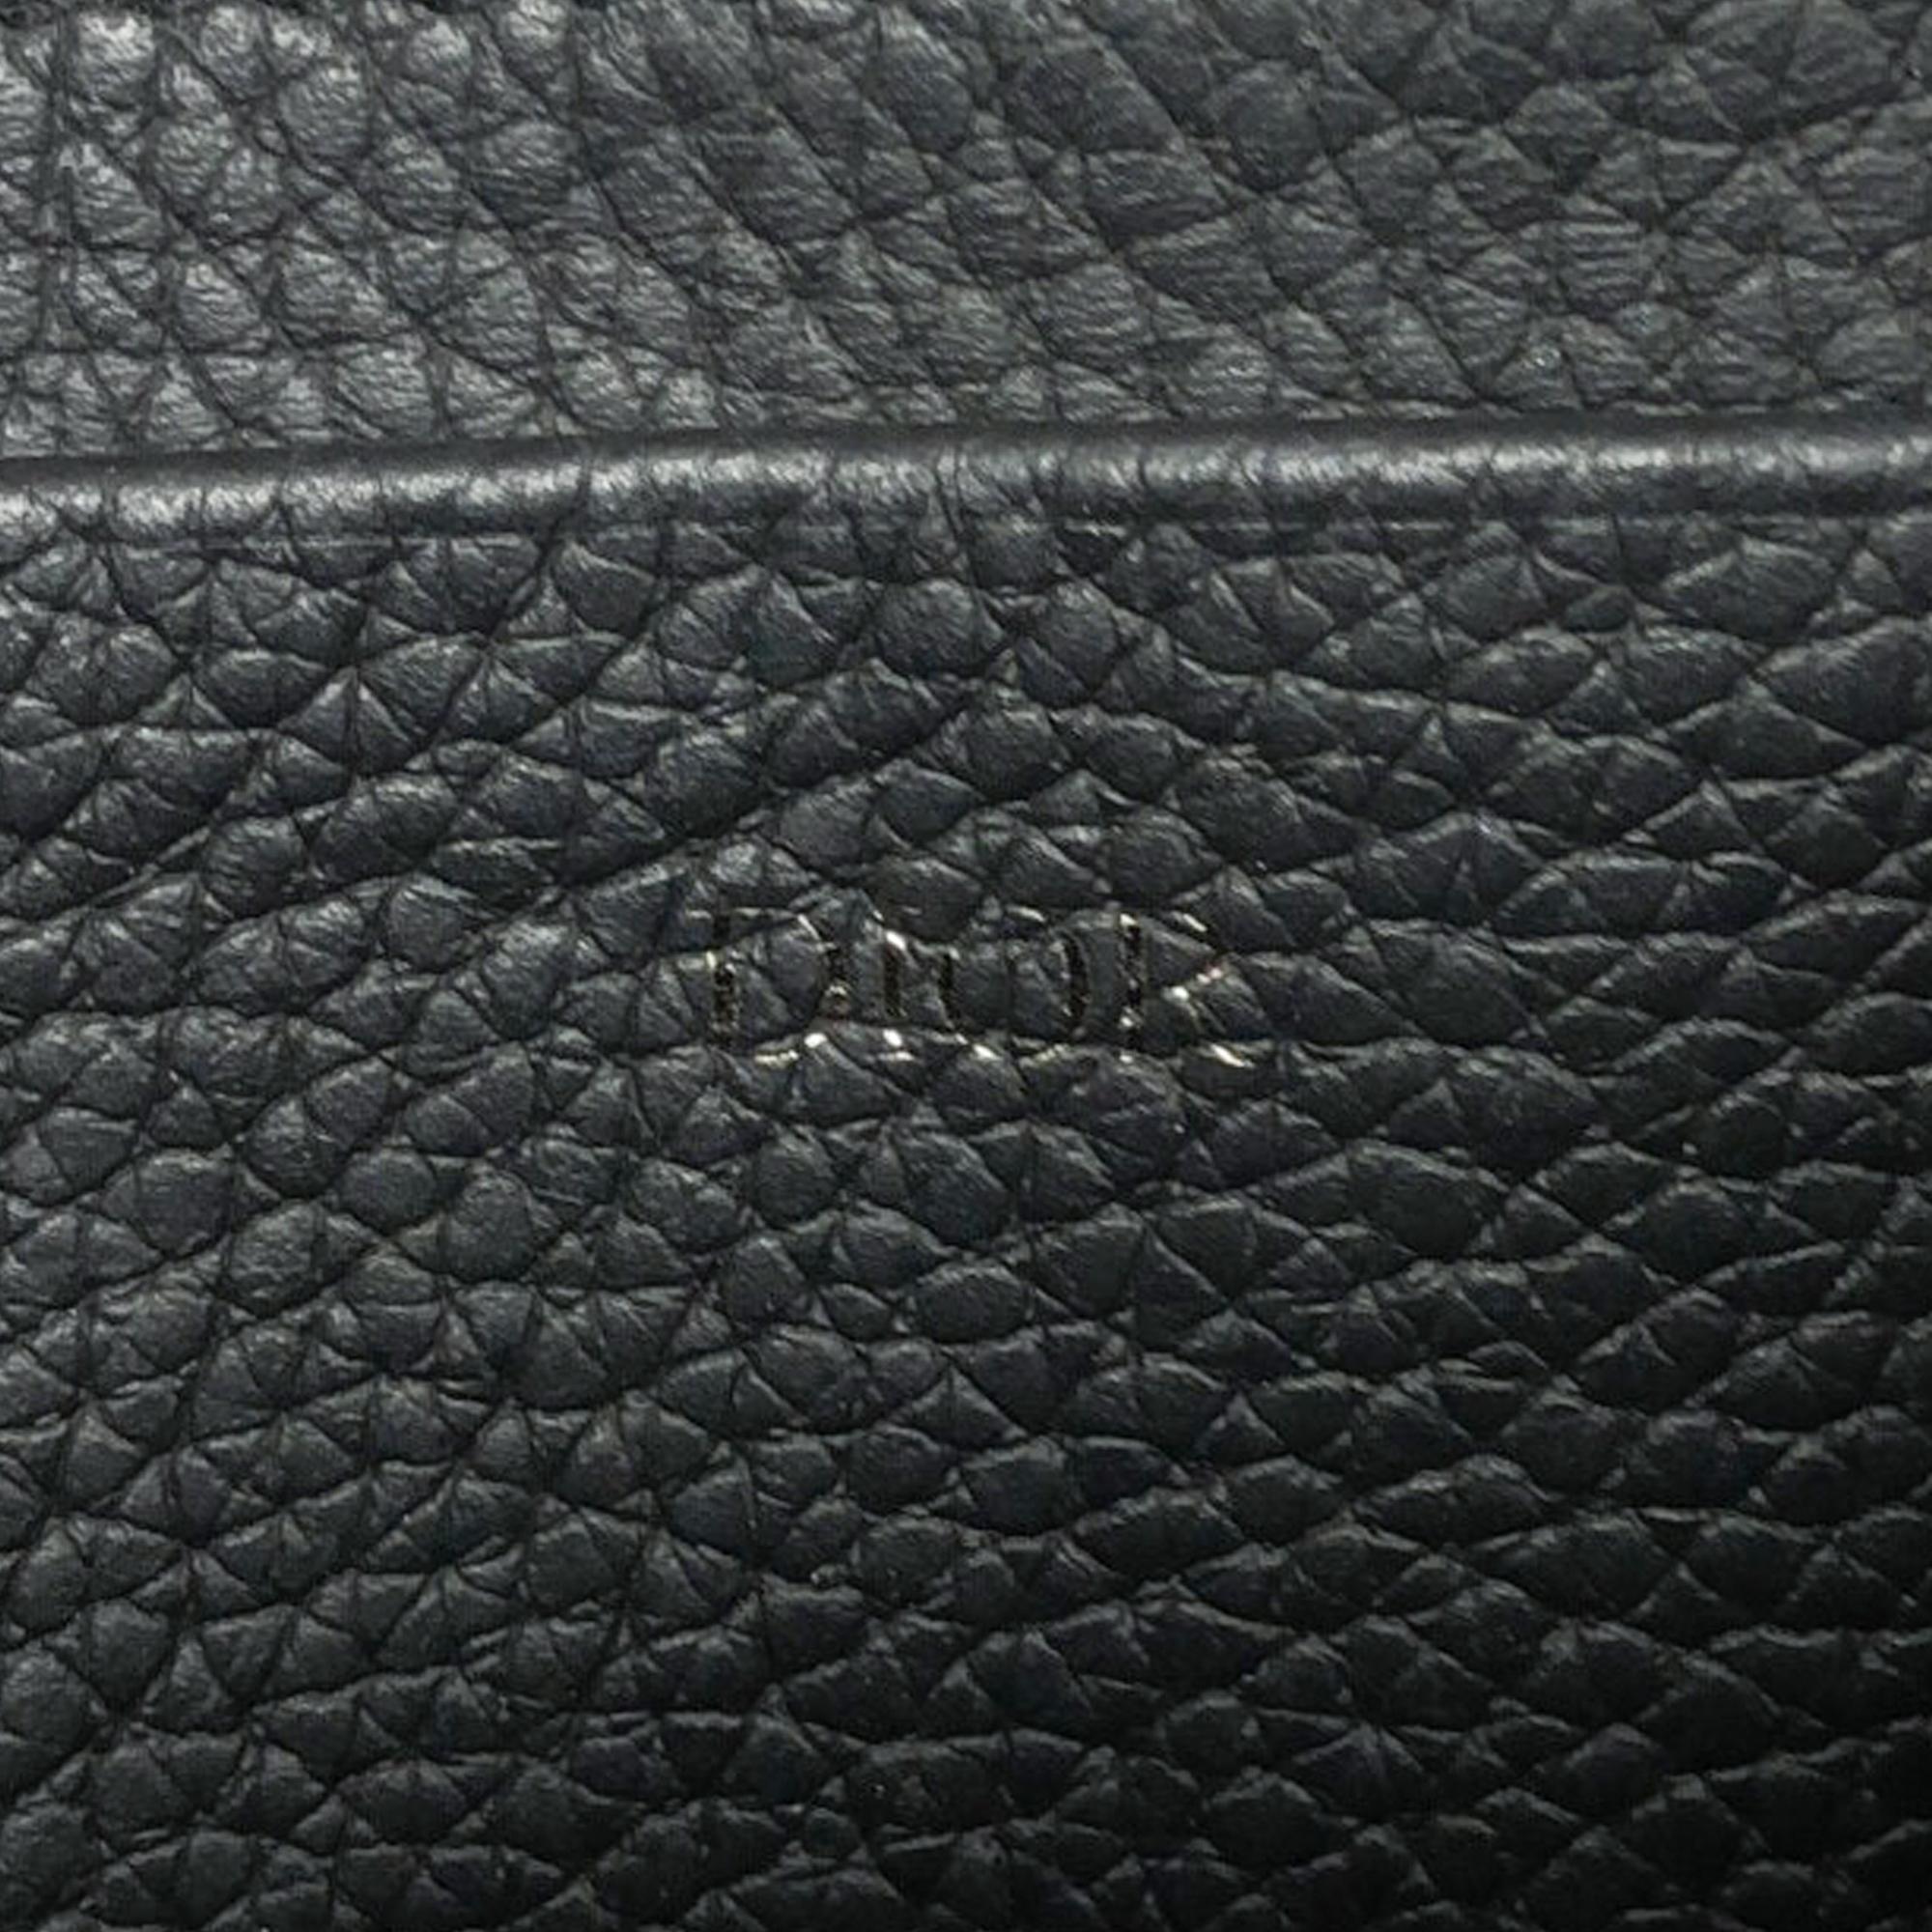 Dior Black Leather Pouch With Strap